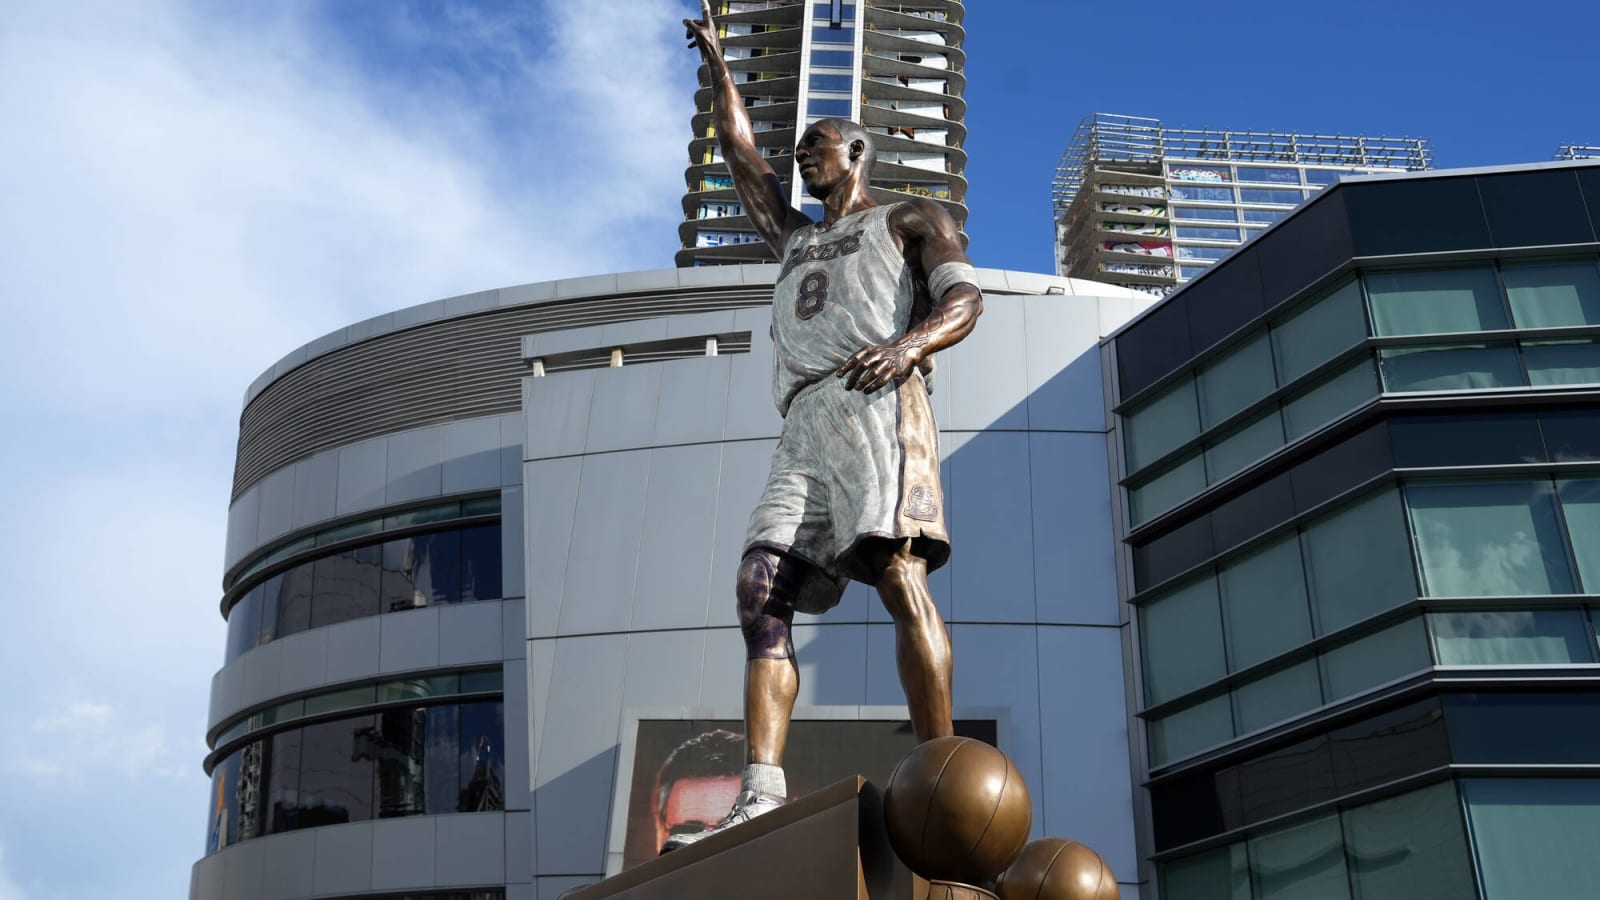 Los Angeles Lakers finally fix Kobe Bryant statue issues